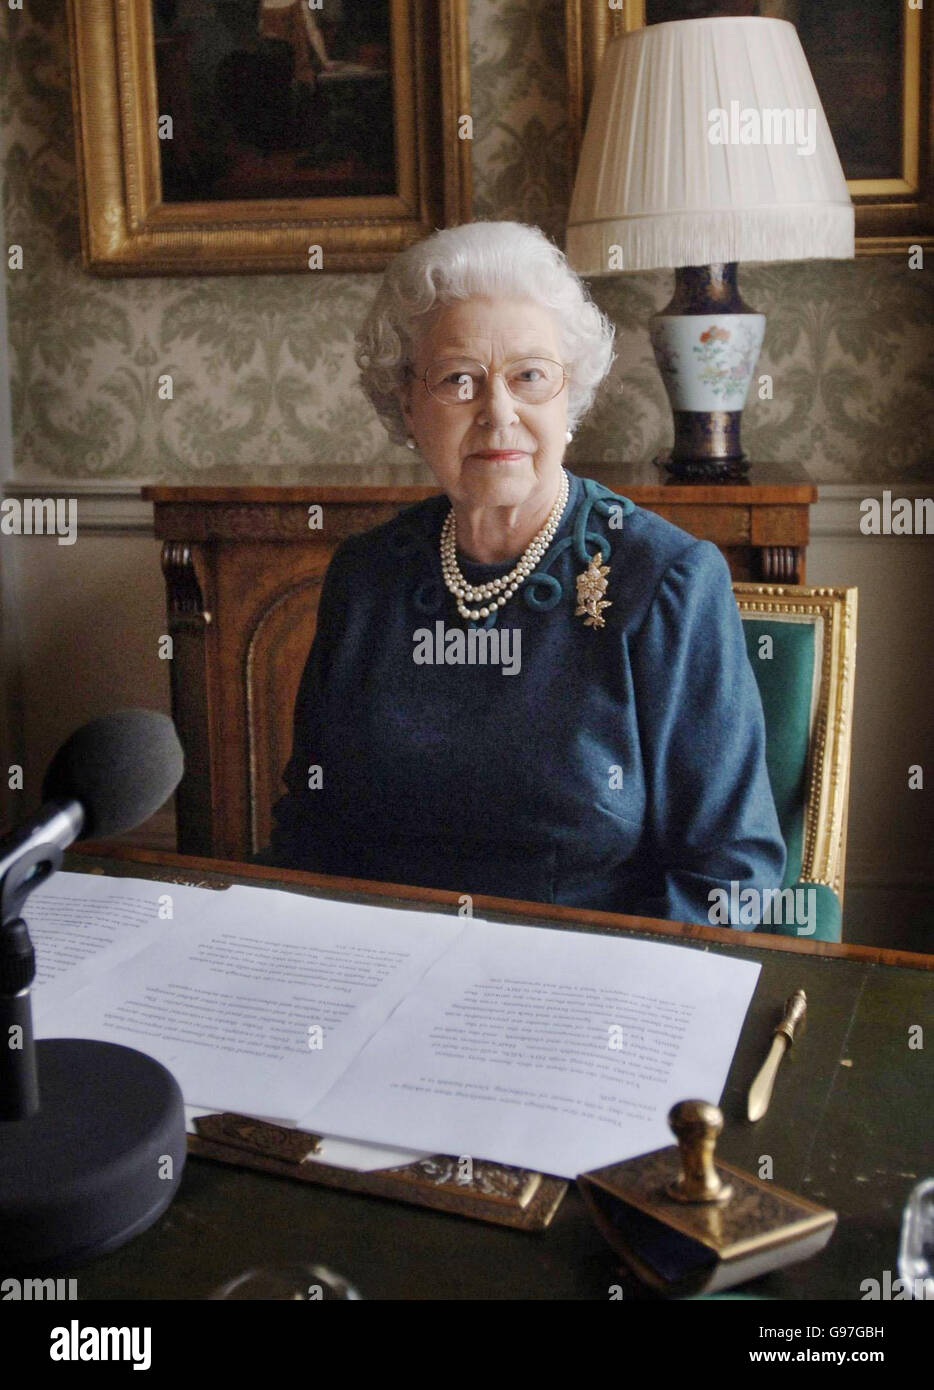 Queen Elizabeth II in the Regency Room at Buckingham Palace Wednesday February 15, 2006, where she recorded her annual message to the Commonwealth. PRESS ASSOCIATION Photo. Photo credit should read: Stefan Rousseau/WPA Rota/PA. Stock Photo